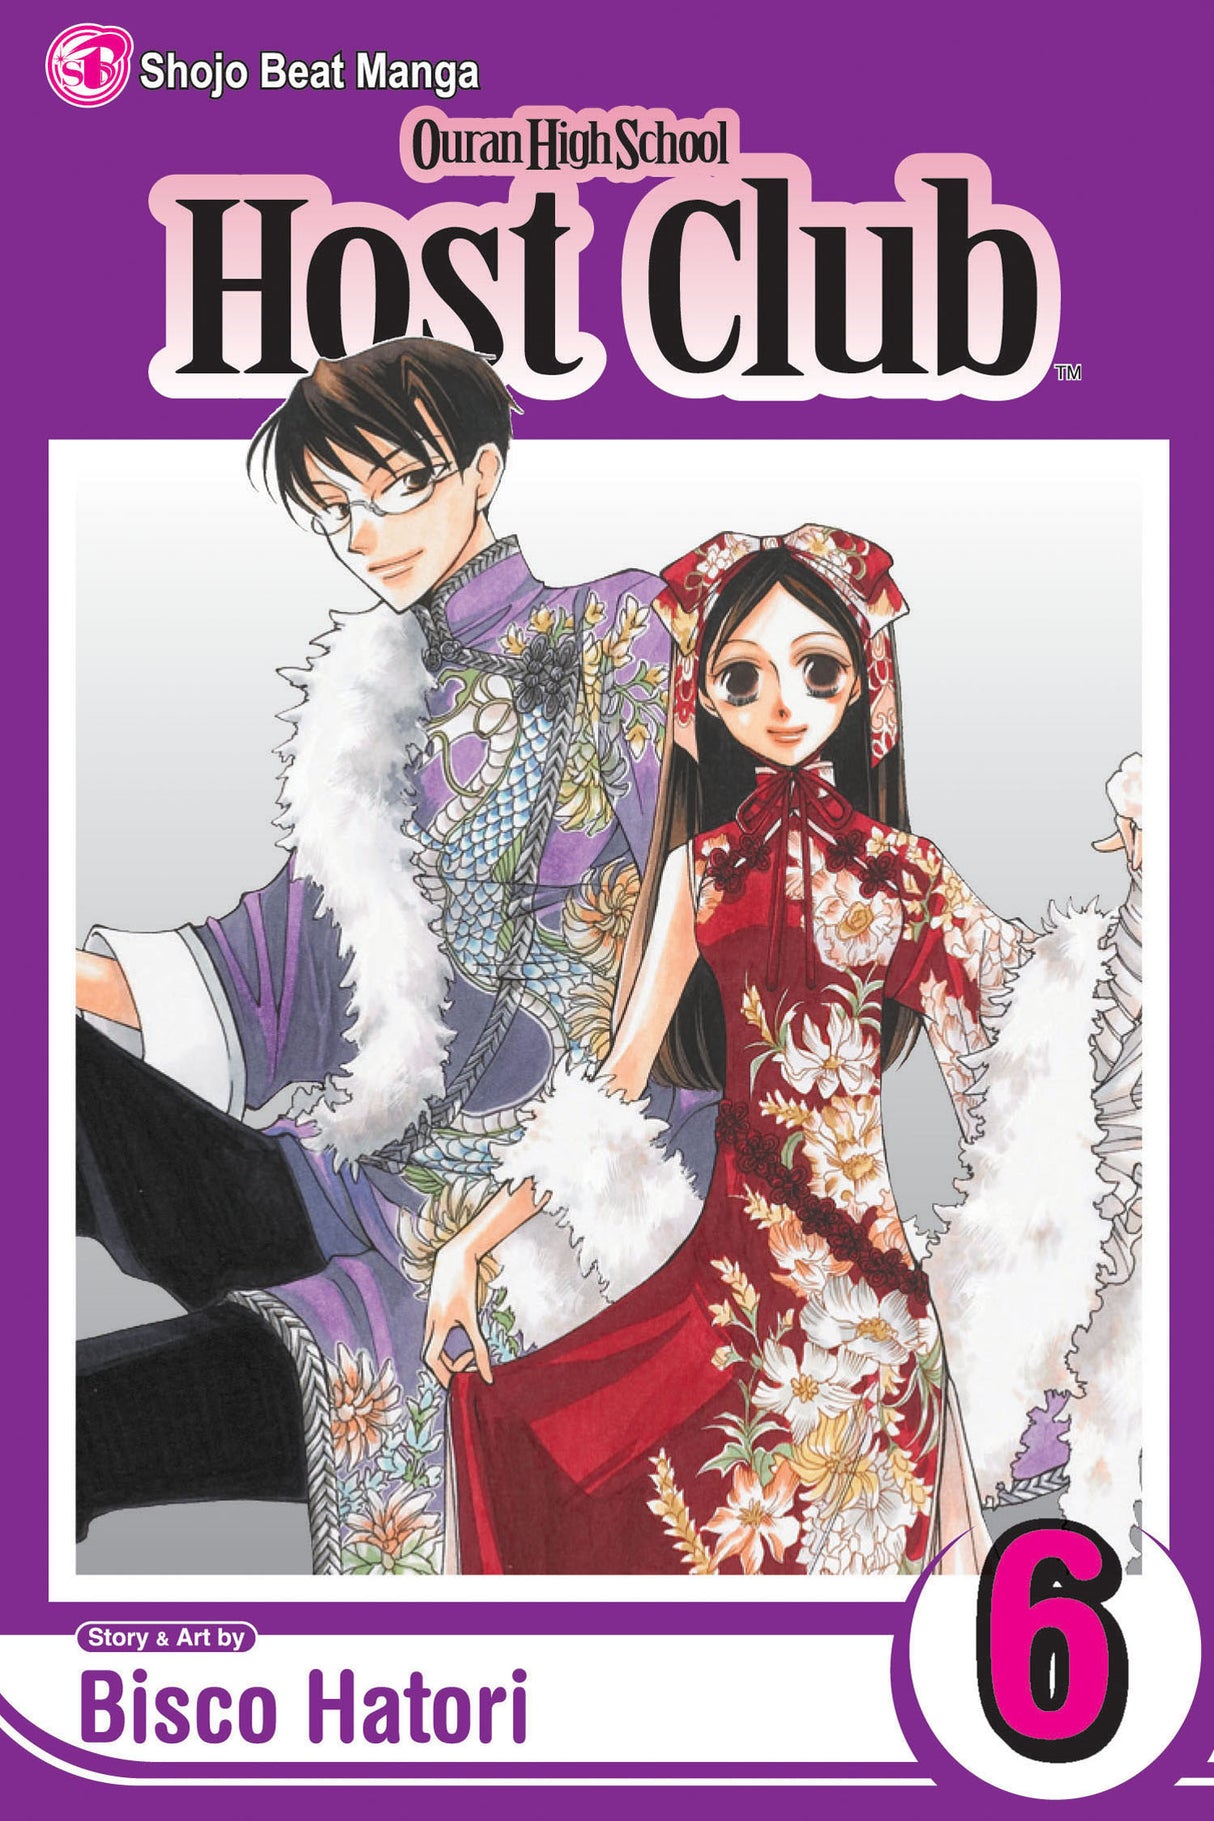 Cover image of the Manga Ouran High School Host Club, Vol. 6